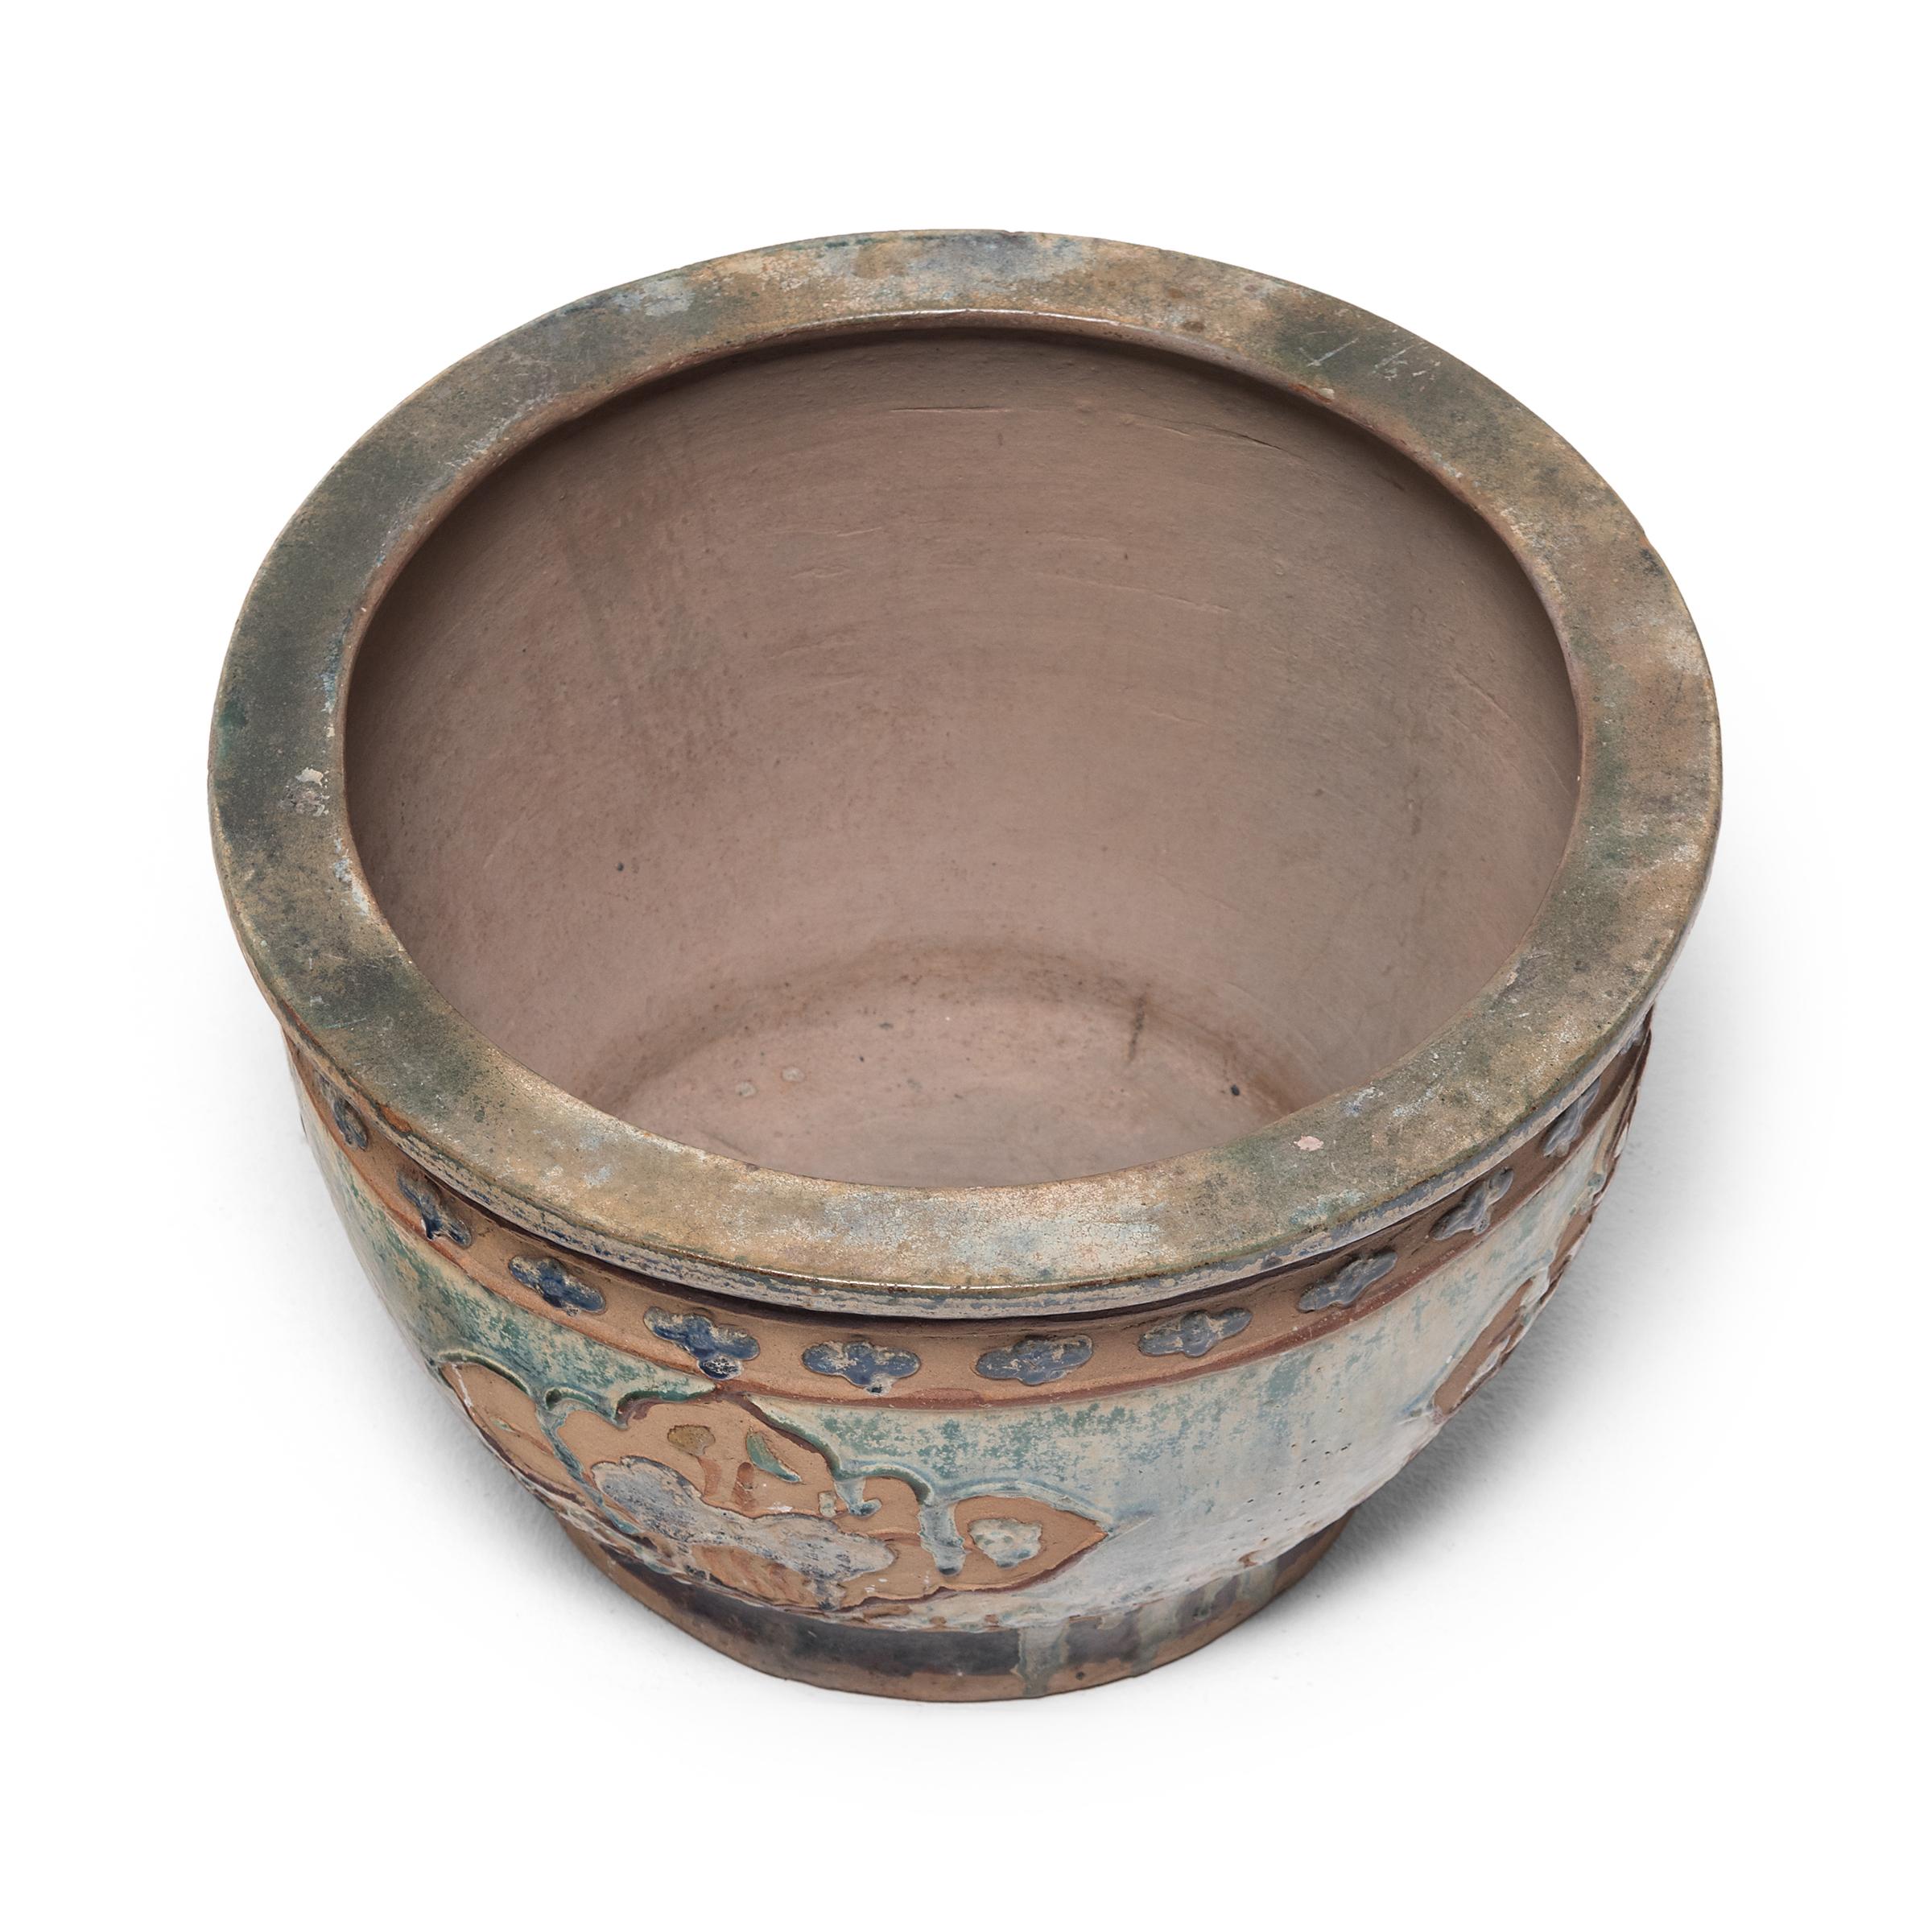 Ceramic Chinese Drip Glaze Relief Planter, c. 1930 For Sale